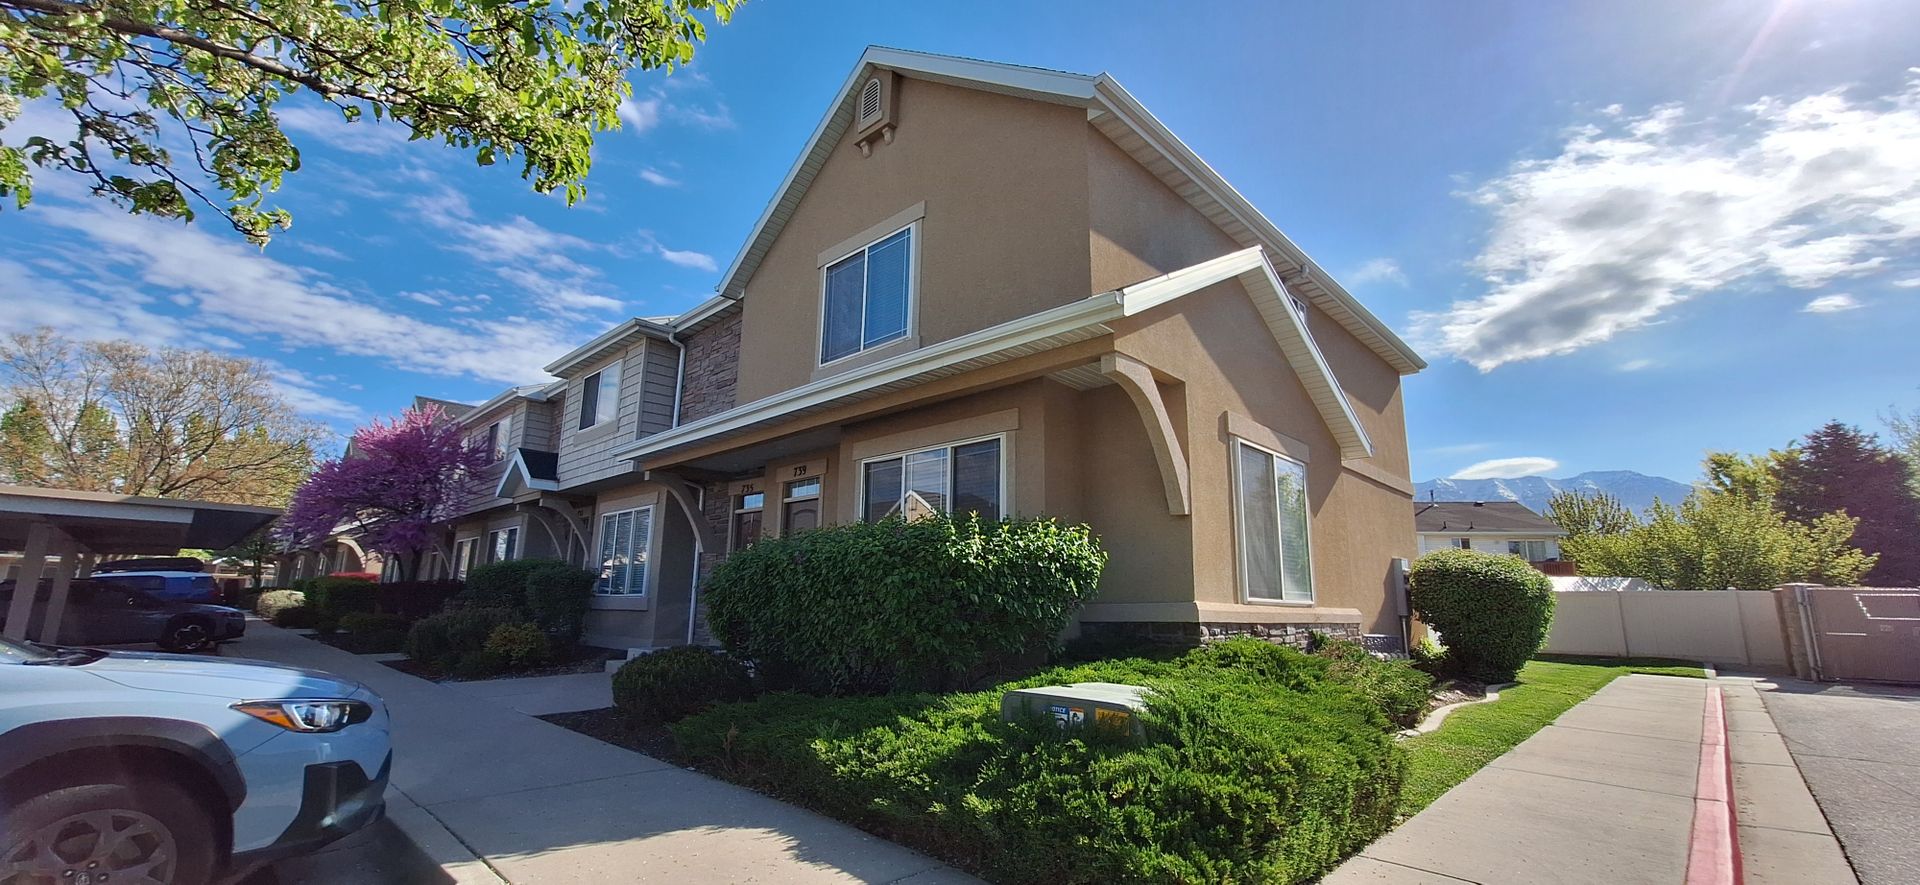 Spacious End Unit Townhome - A must see!